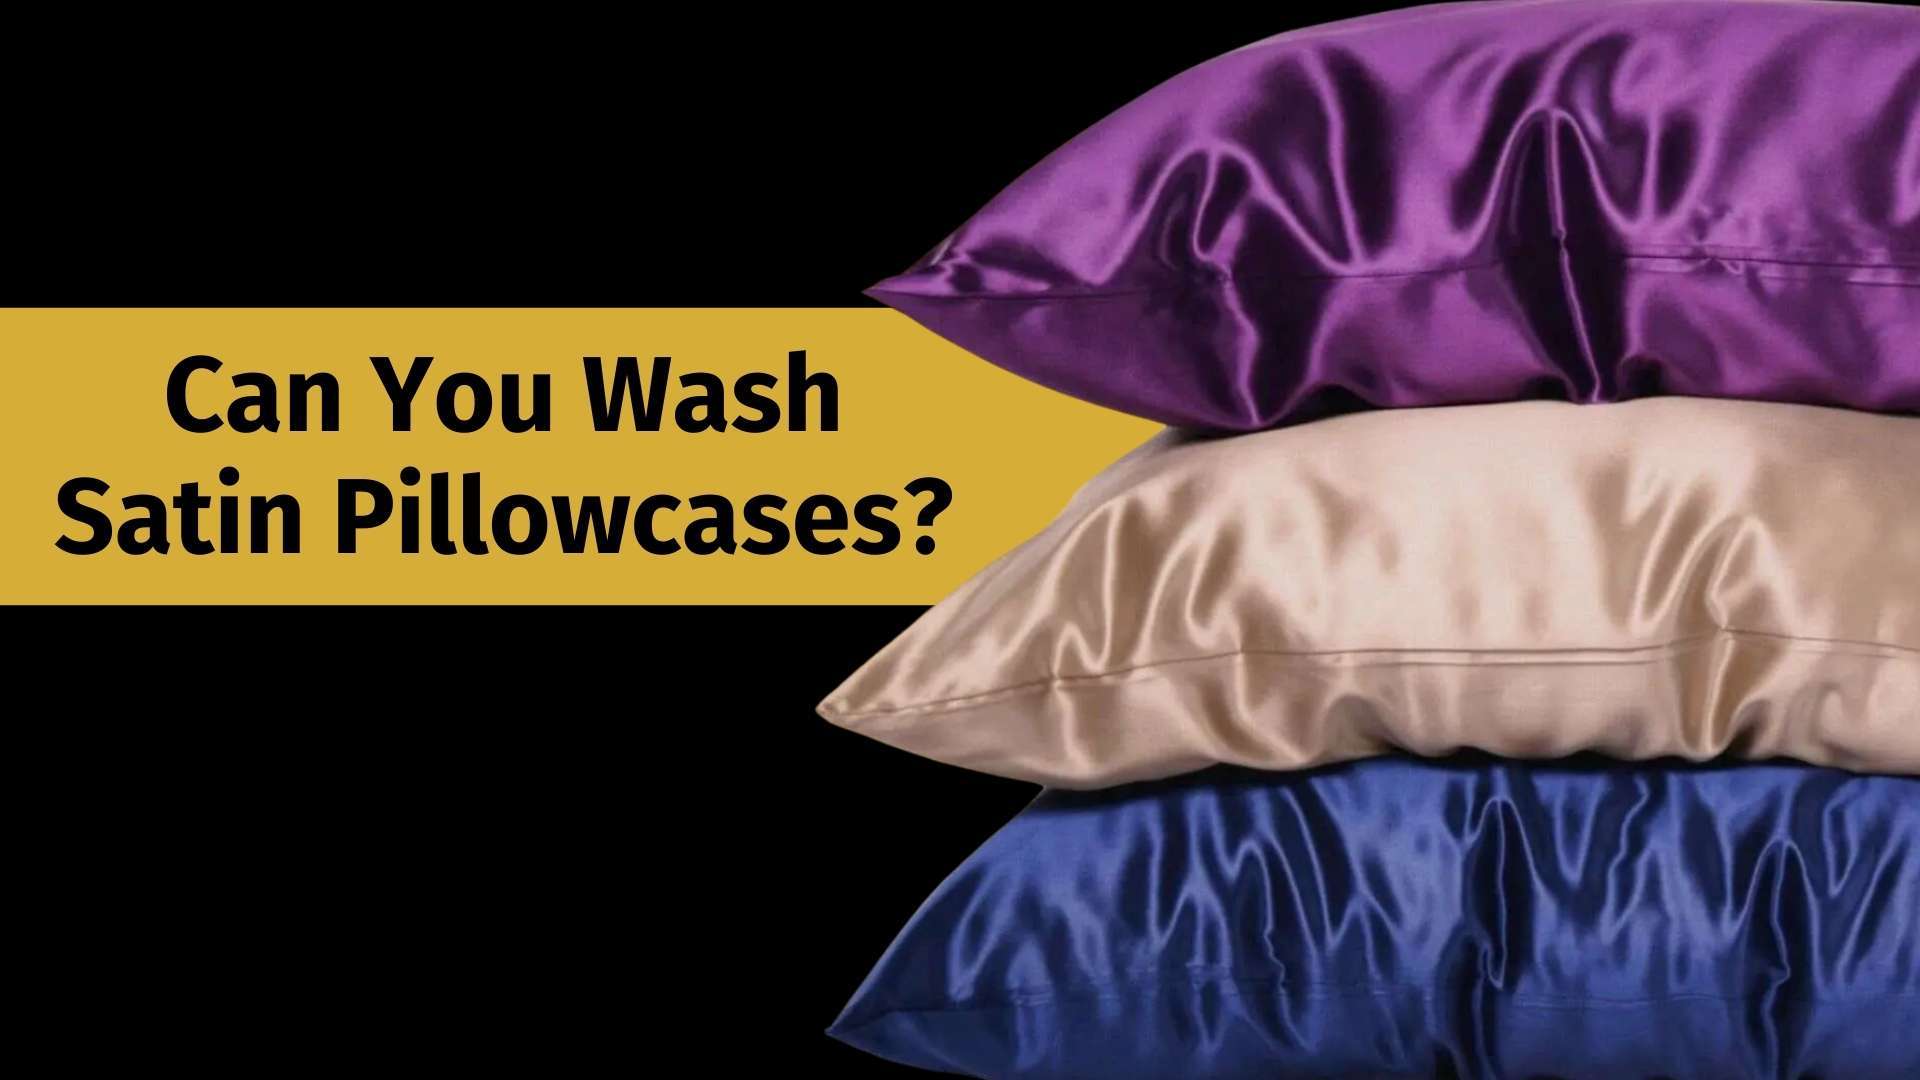 can you wash satin pillowcases banner image with a blue, gold, and purple satin pillow piled on top of each other